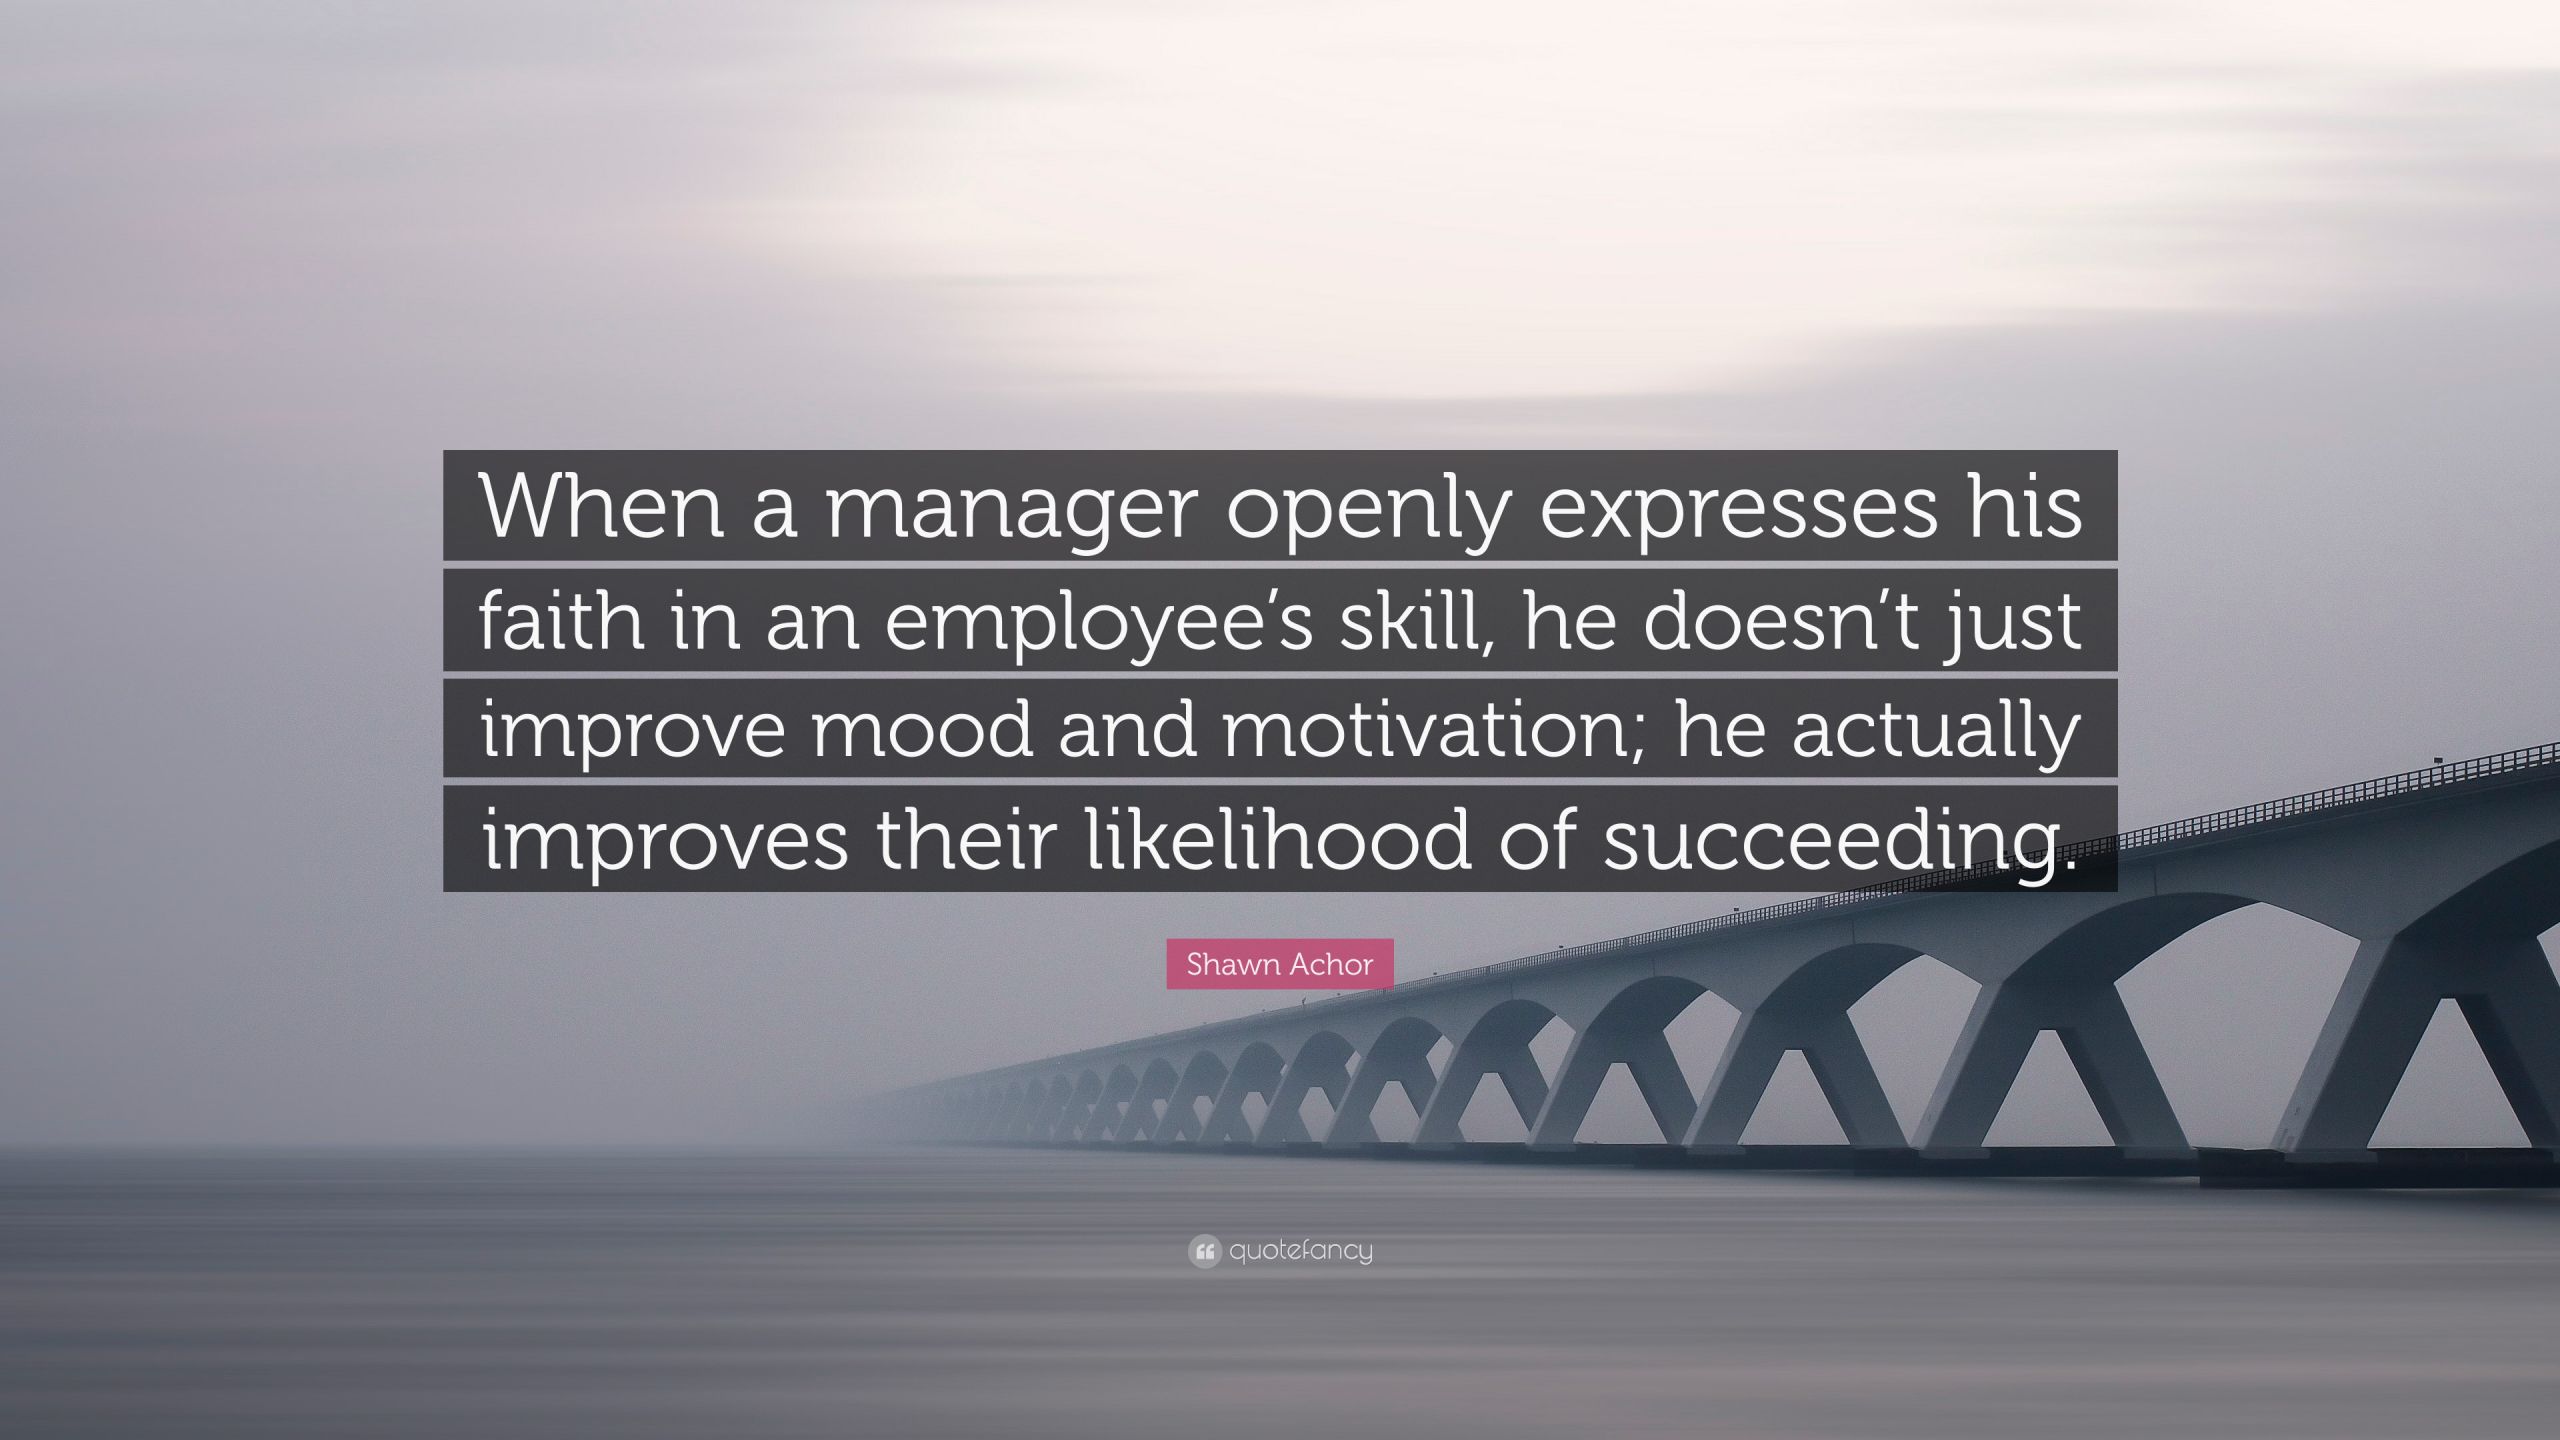 Motivational Quotes For Employees From Managers
 Leadership Quotes 100 wallpapers Quotefancy